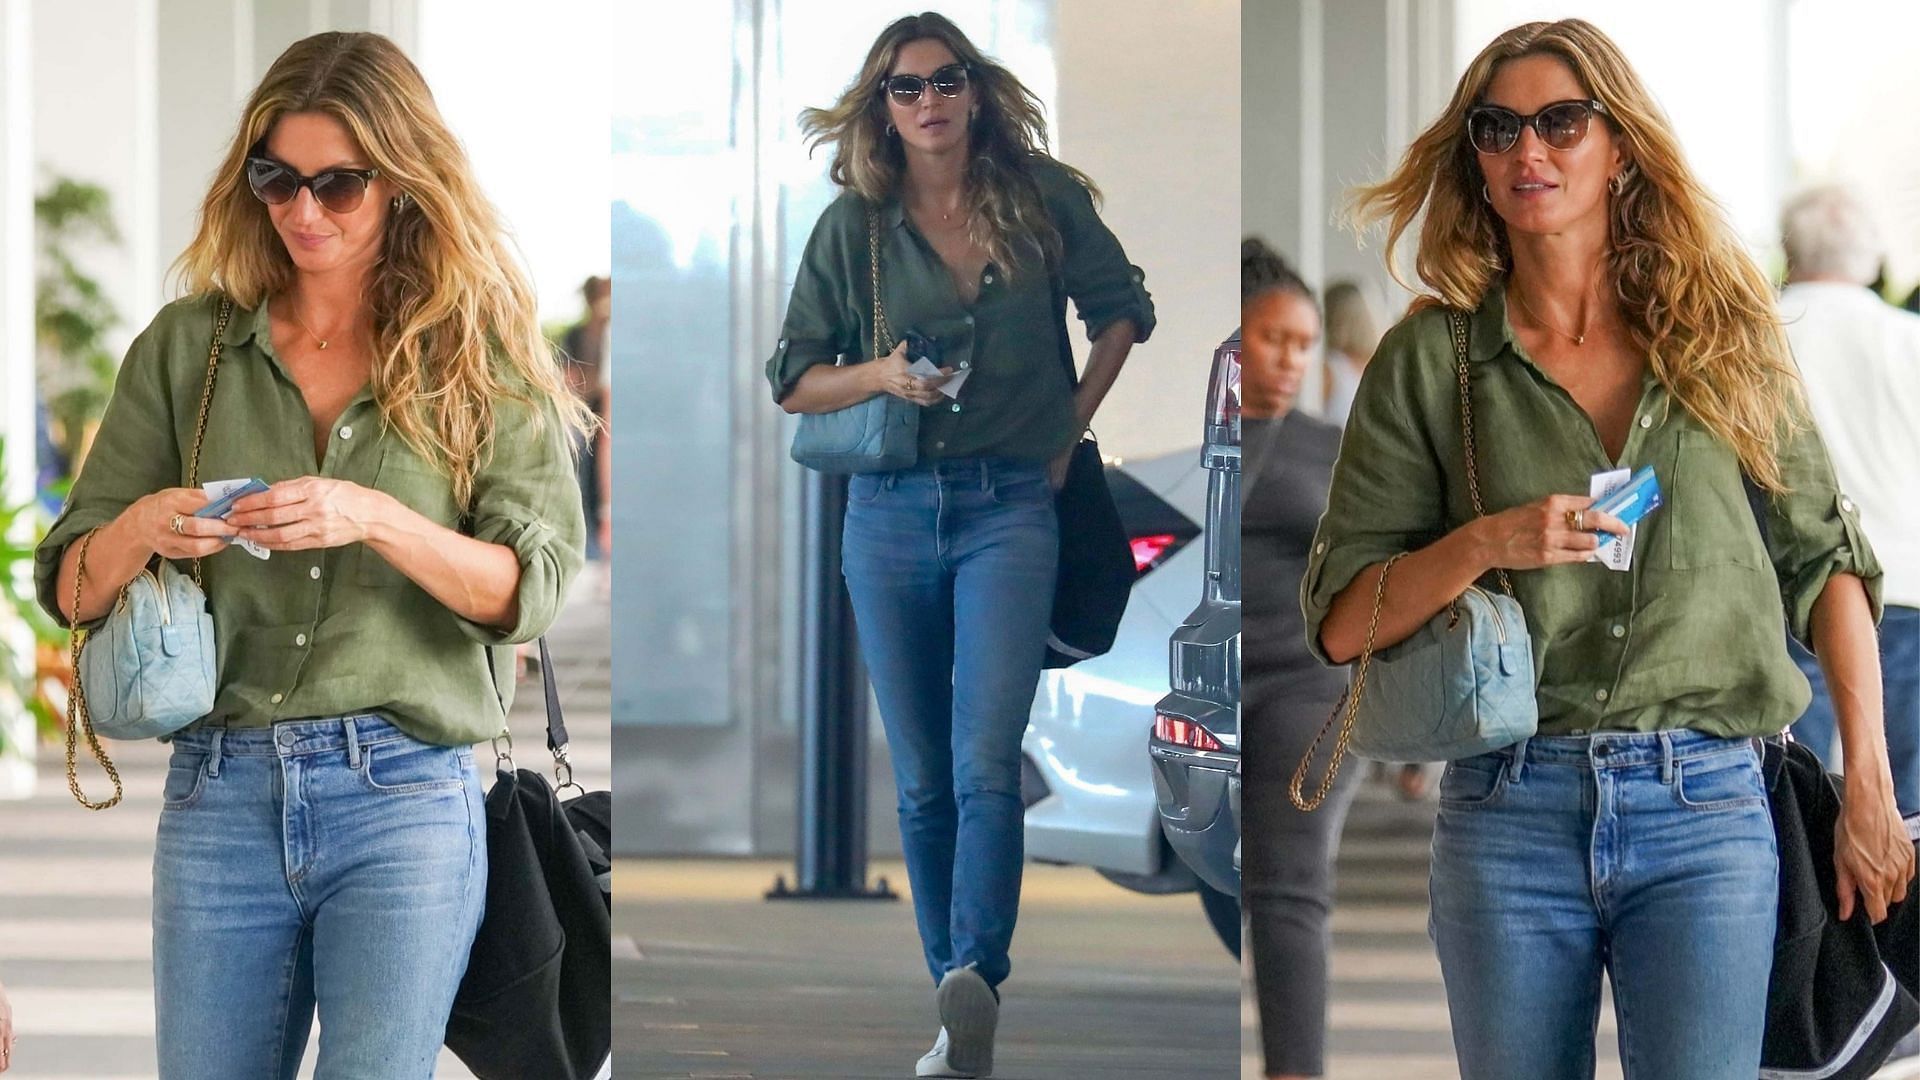 Brazilian supermodel Gisele Bundchen wears casual attire while visiting a shopping district in Miami, Florida. (Image from meaww.com via BackGrid)